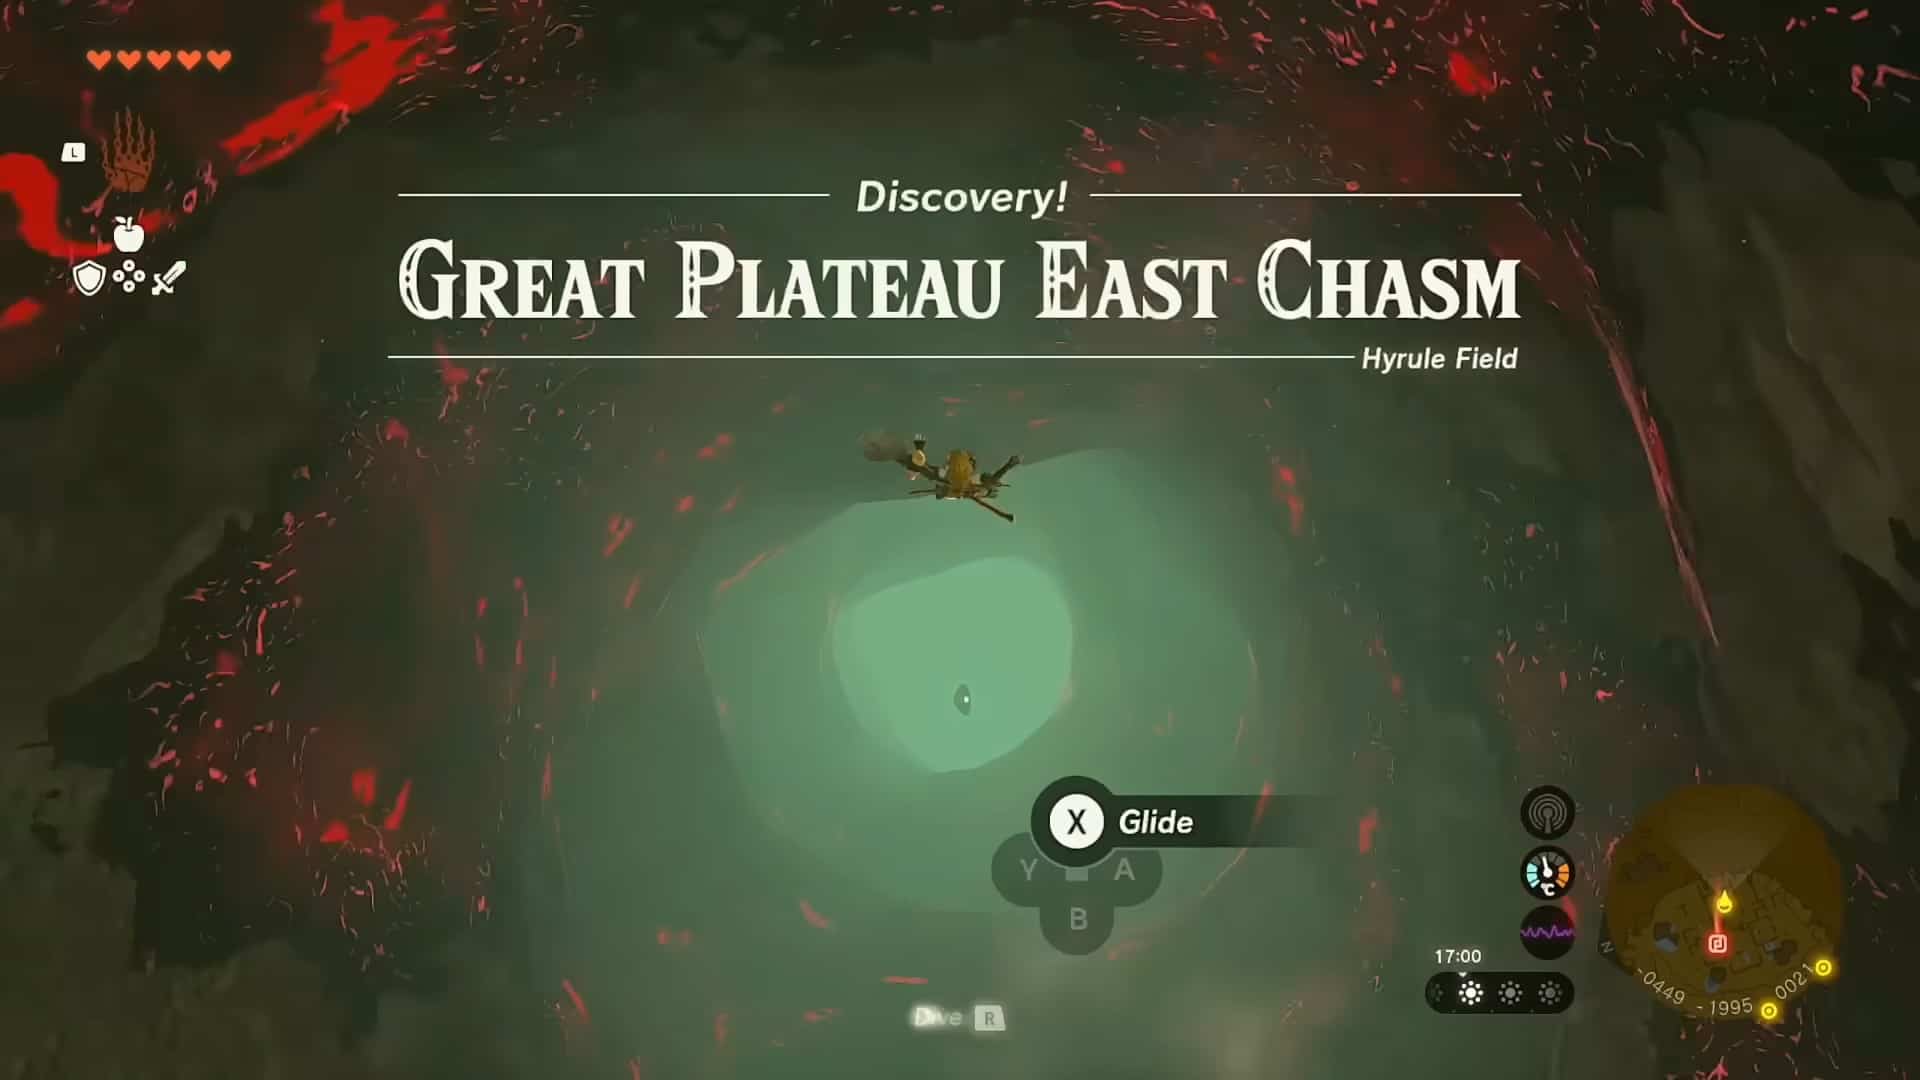 Great Plateau East Chasm TotK Featured Image